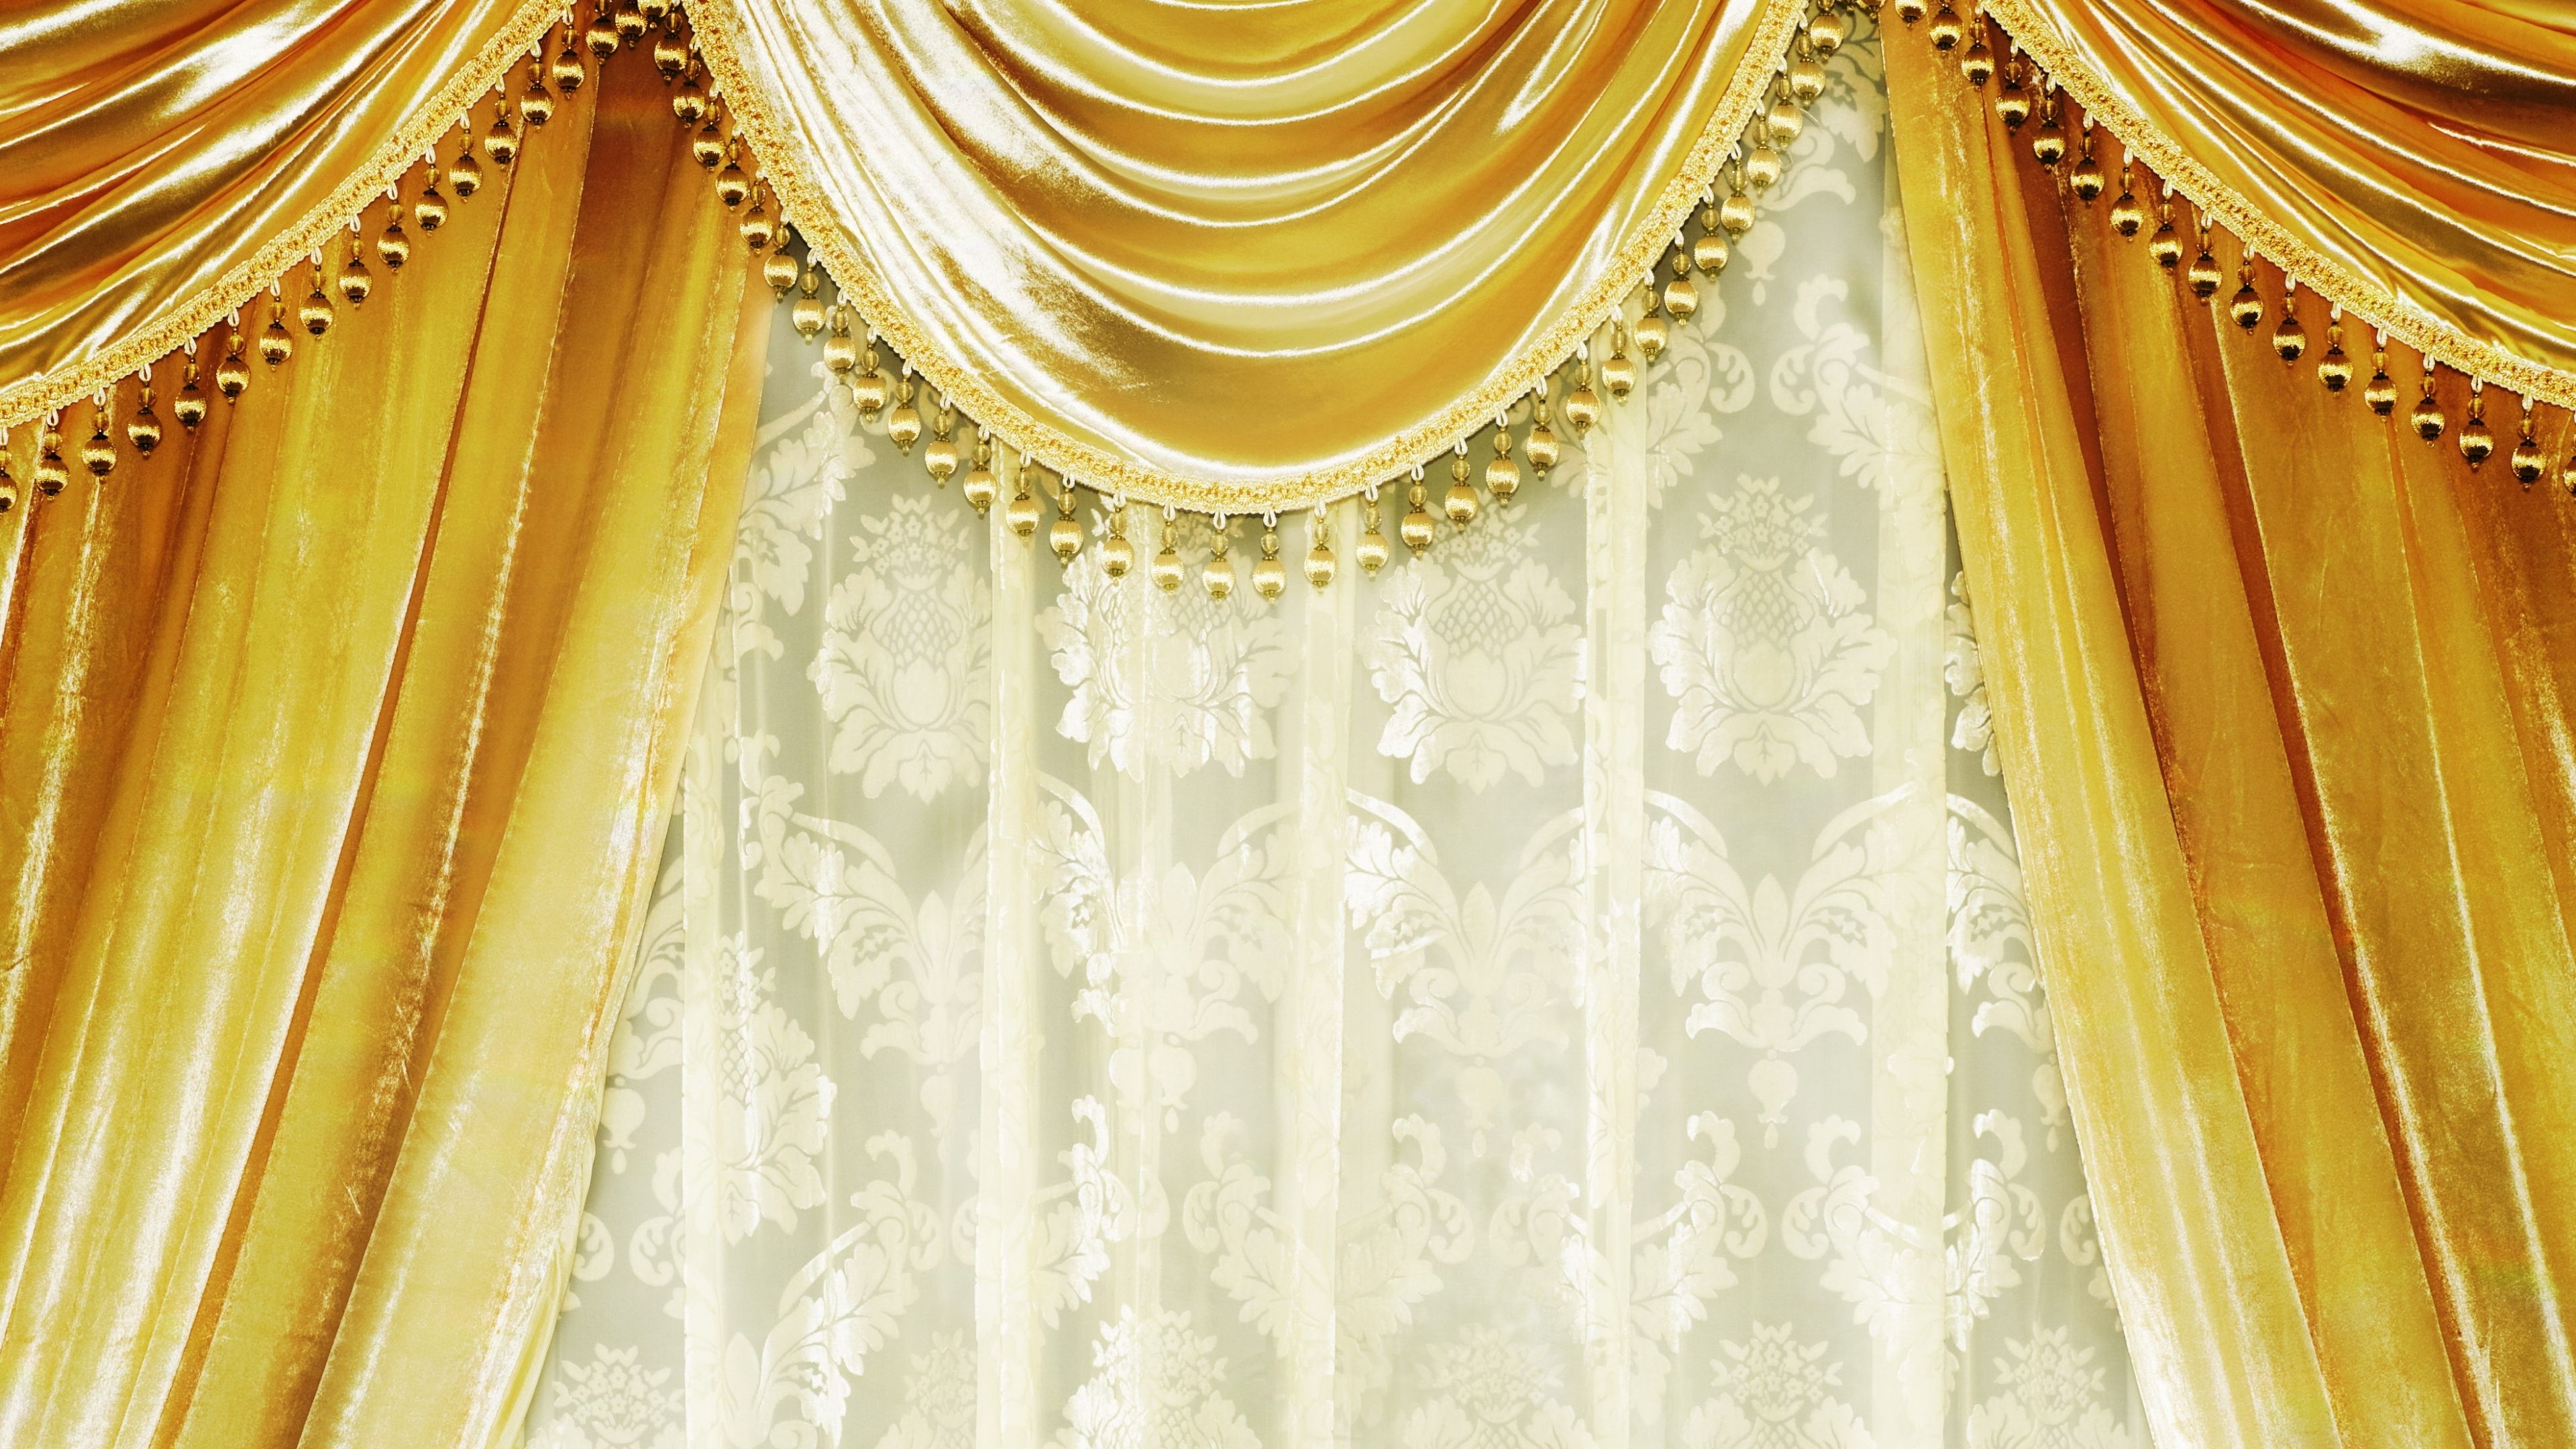 Download Wallpaper 3840×2160 Curtains Gold Velvet Curtains Within Yellow Velvet Curtains (View 10 of 15)